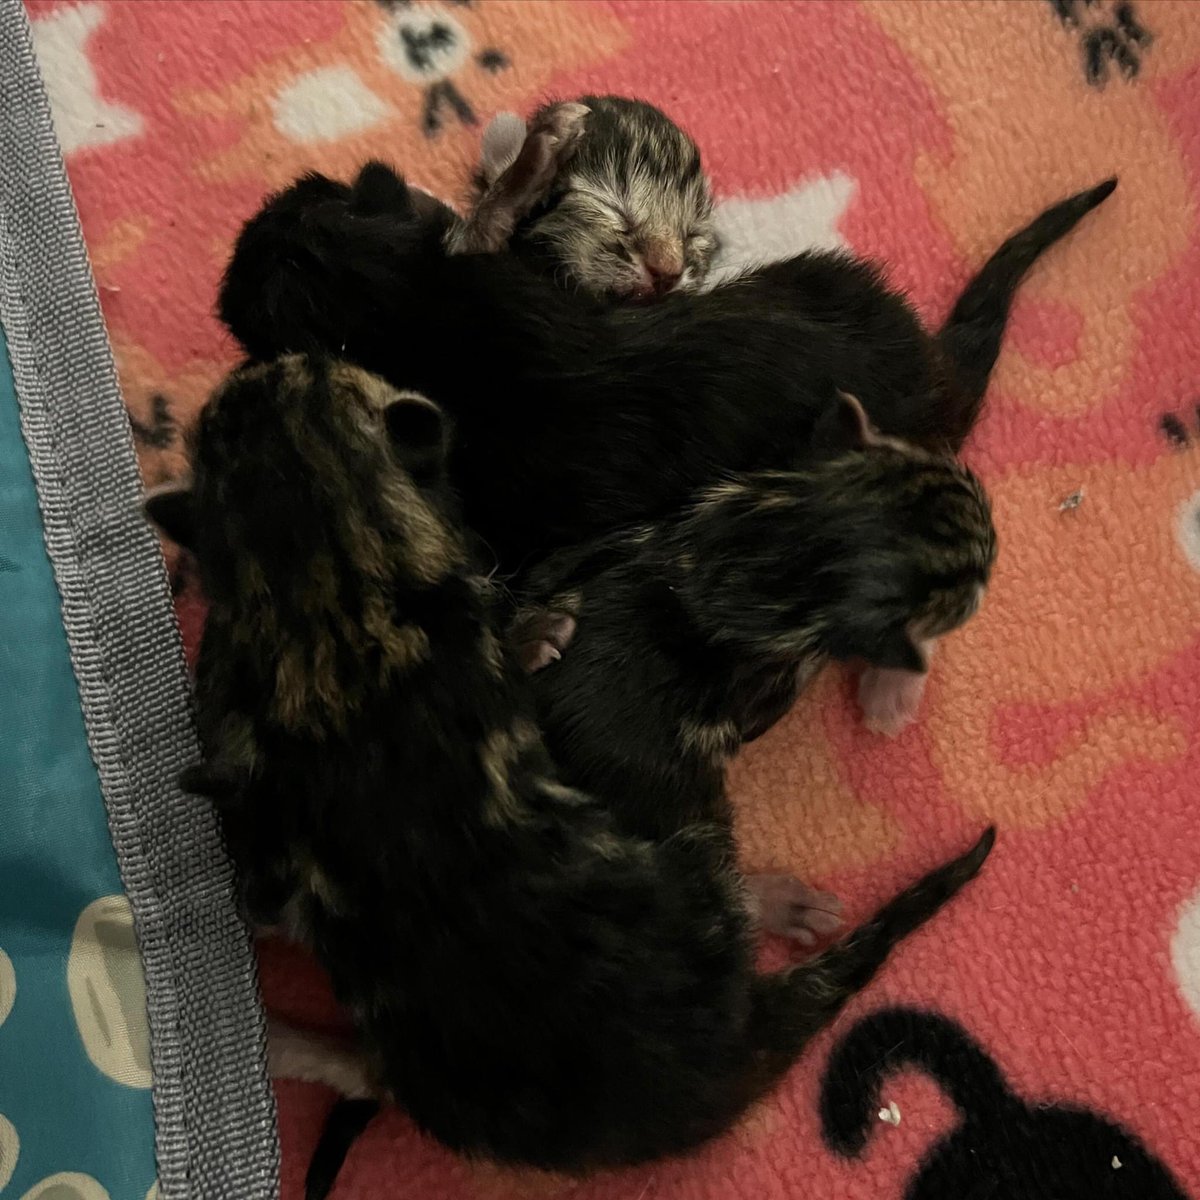 Happy Birthday babies! 3 tabbies and 1 tuxie. Baby #1 is tiny…only 69g. The others are 82g, 85g and 90g. Mom is a bit confused but has been letting them nurse. They are precious!